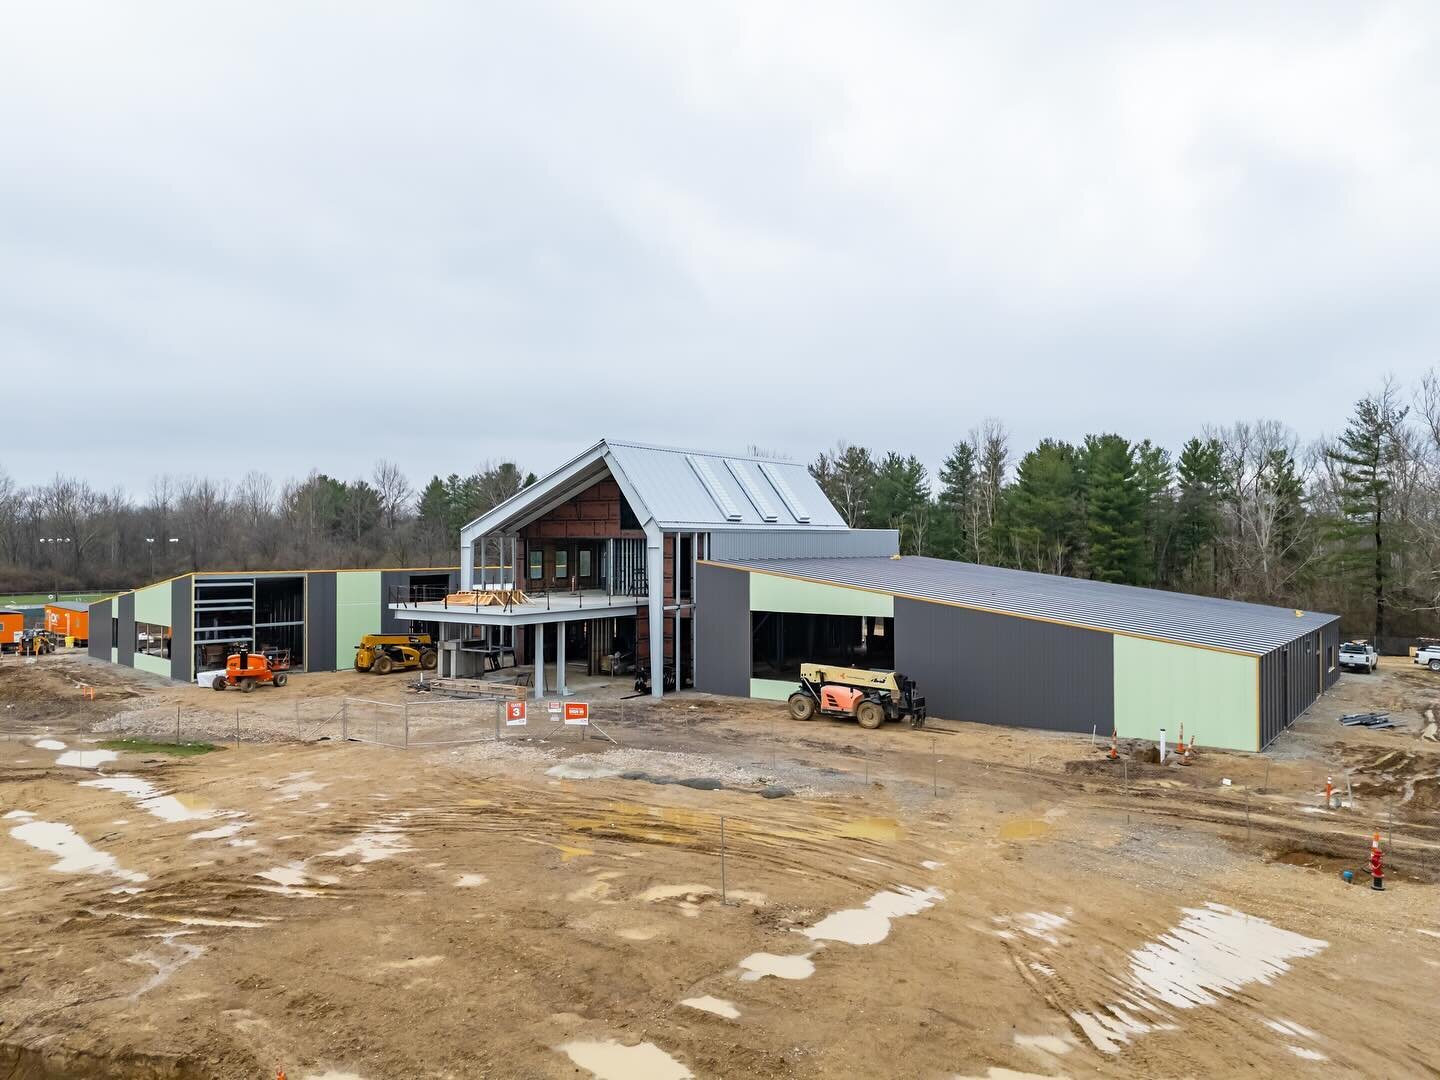 🏗️ We&rsquo;re making progress at Camp Ken Jockety! Swipe left to see the most recent construction updates on @girlscoutsoh STEM Leadership Center + Maker Space. 🔨
&bull;
&bull;
&bull;
&bull;
&bull;
#bbcodesign #architecture #interiors #interiordes